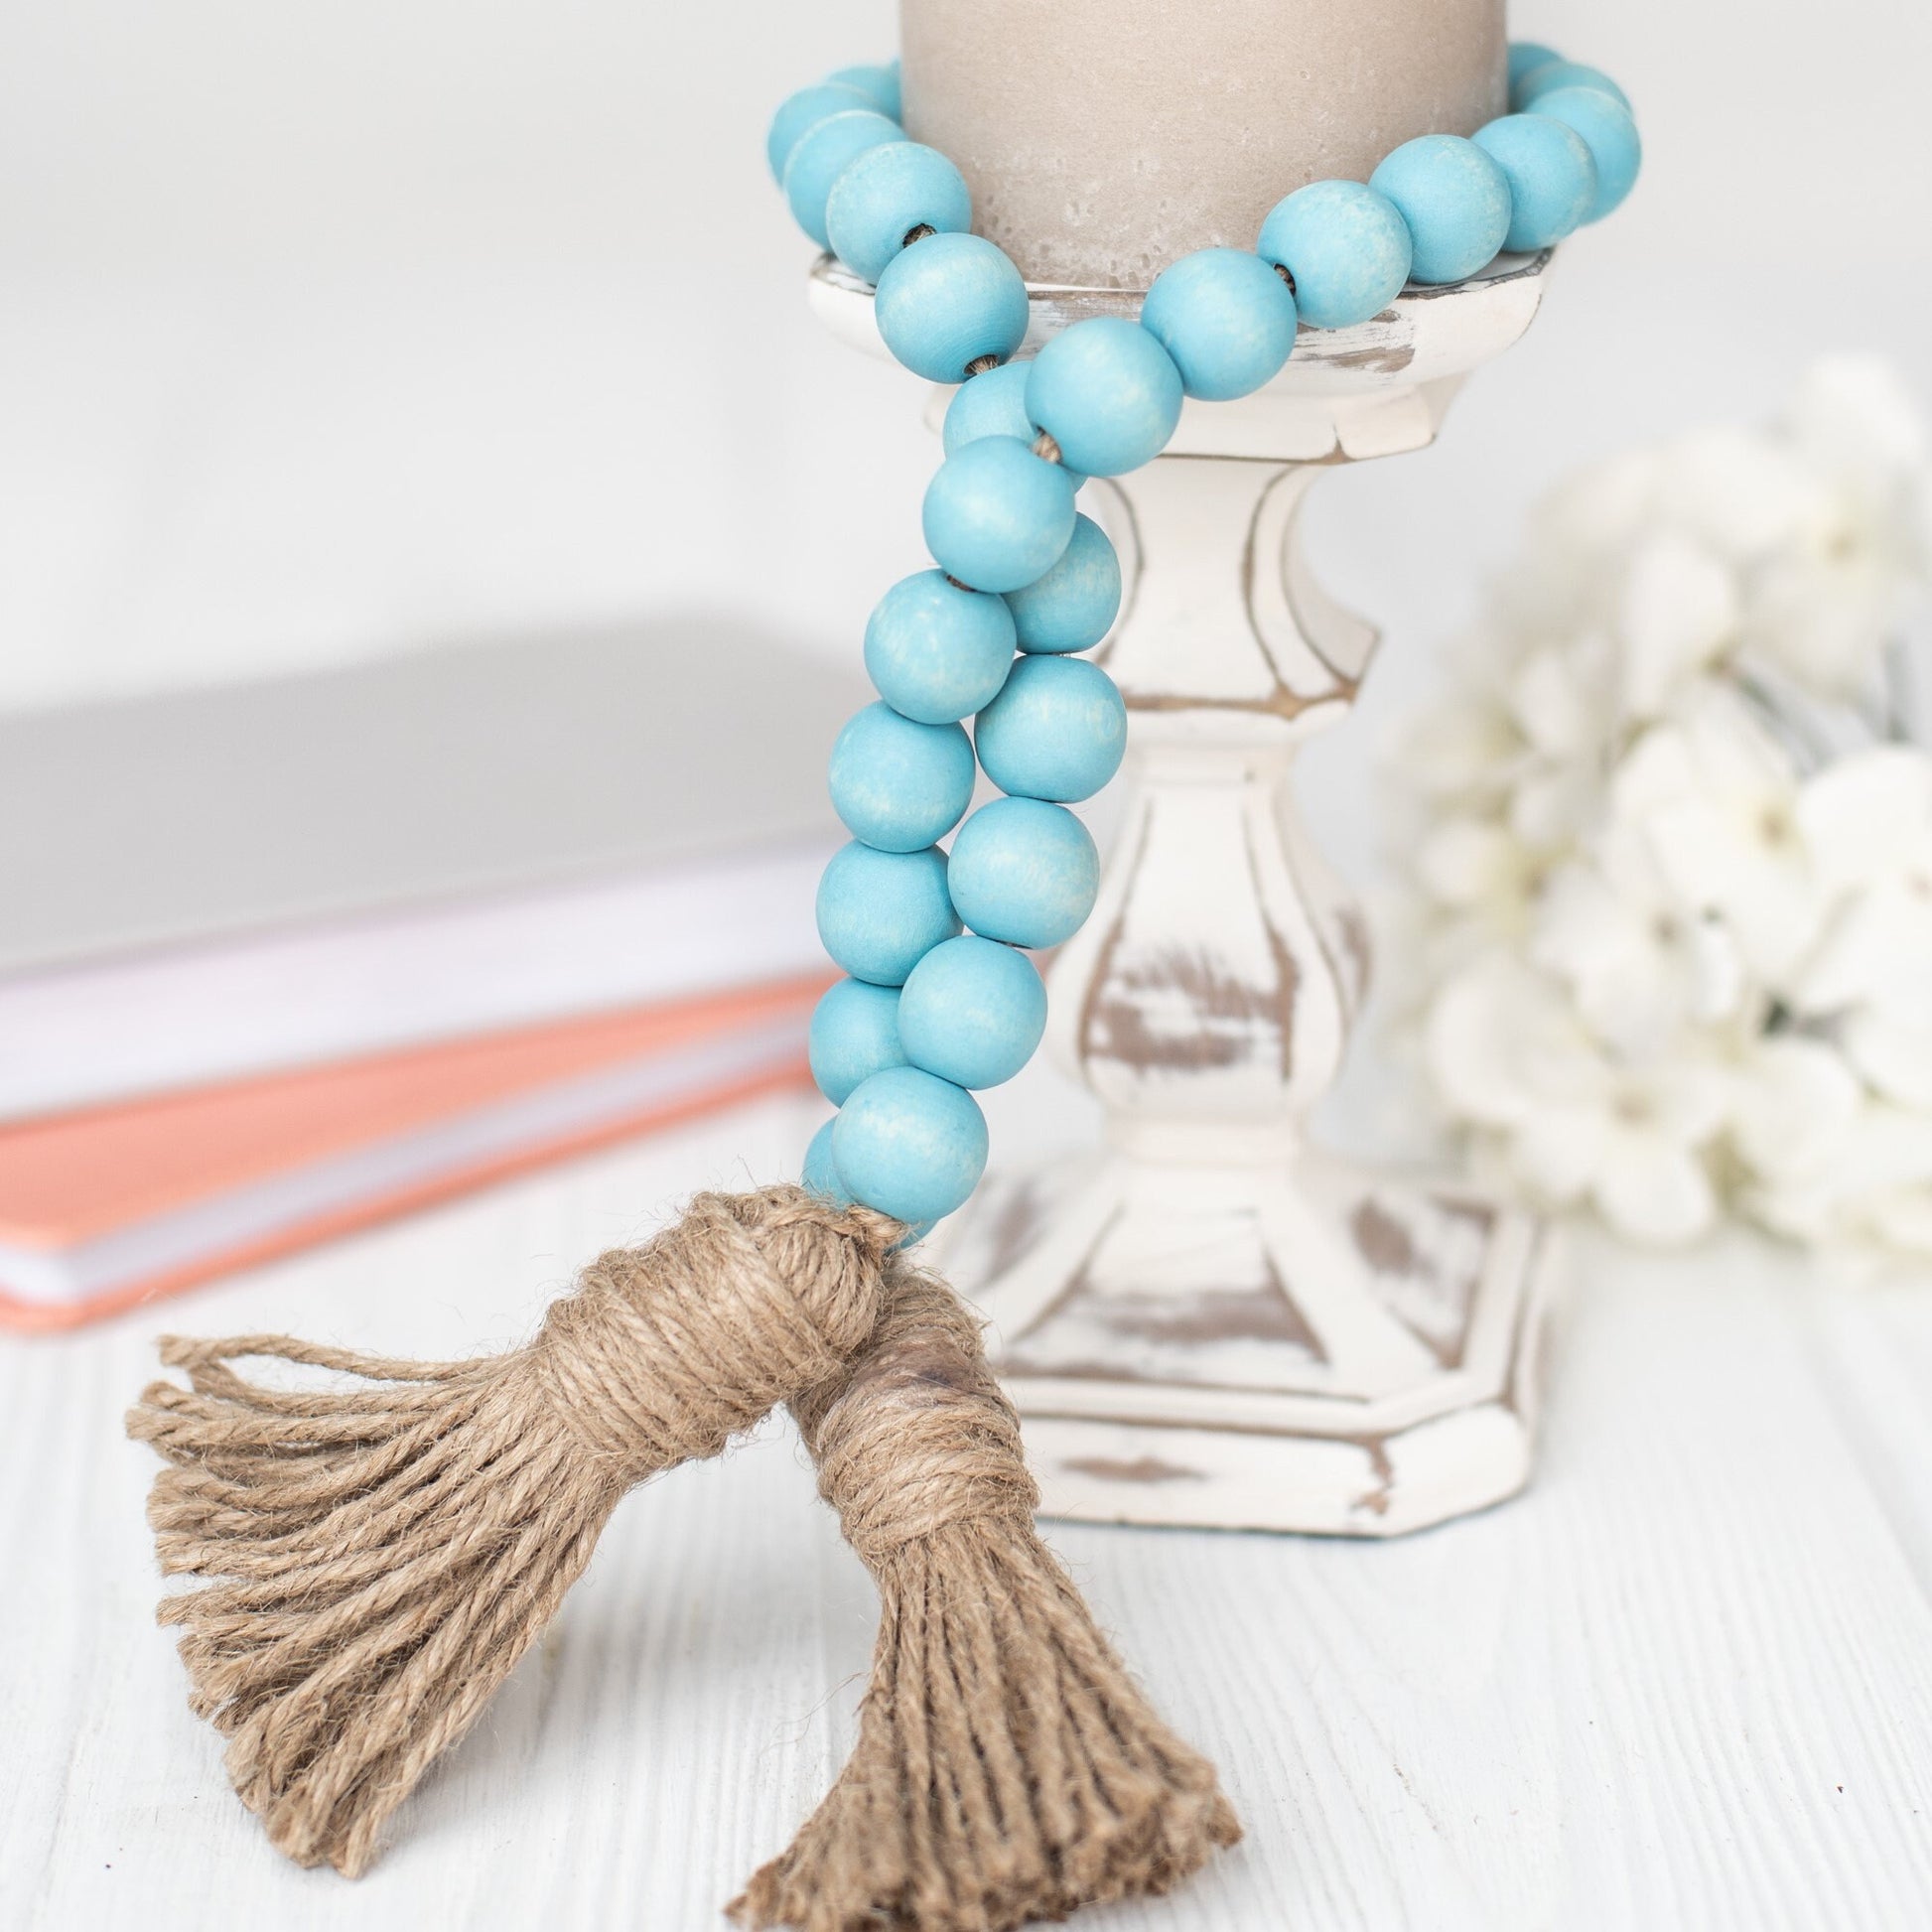 Turquoise Wood Bead Garland with Tassels, Farmhouse Beads, Blue Wood Bead Garland, Farmhouse Gift Ideas